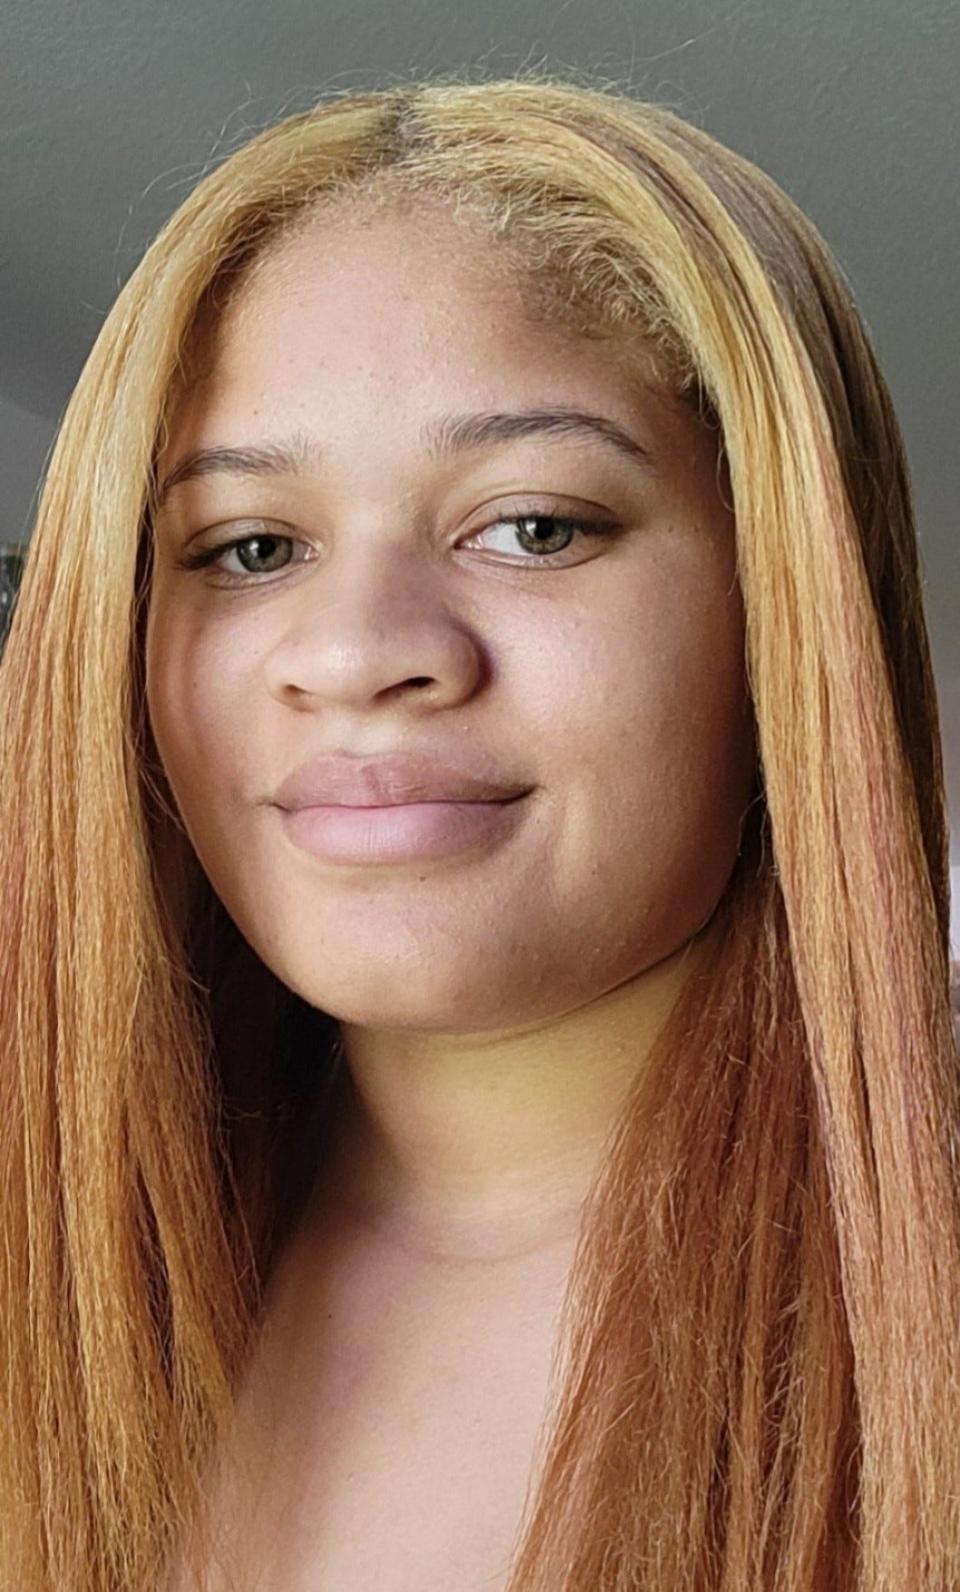 Urbyn Carter, a Durant High School student and one of eight siblings, is a part of a group of students organizing with March for Our Lives on Saturday, June 11.